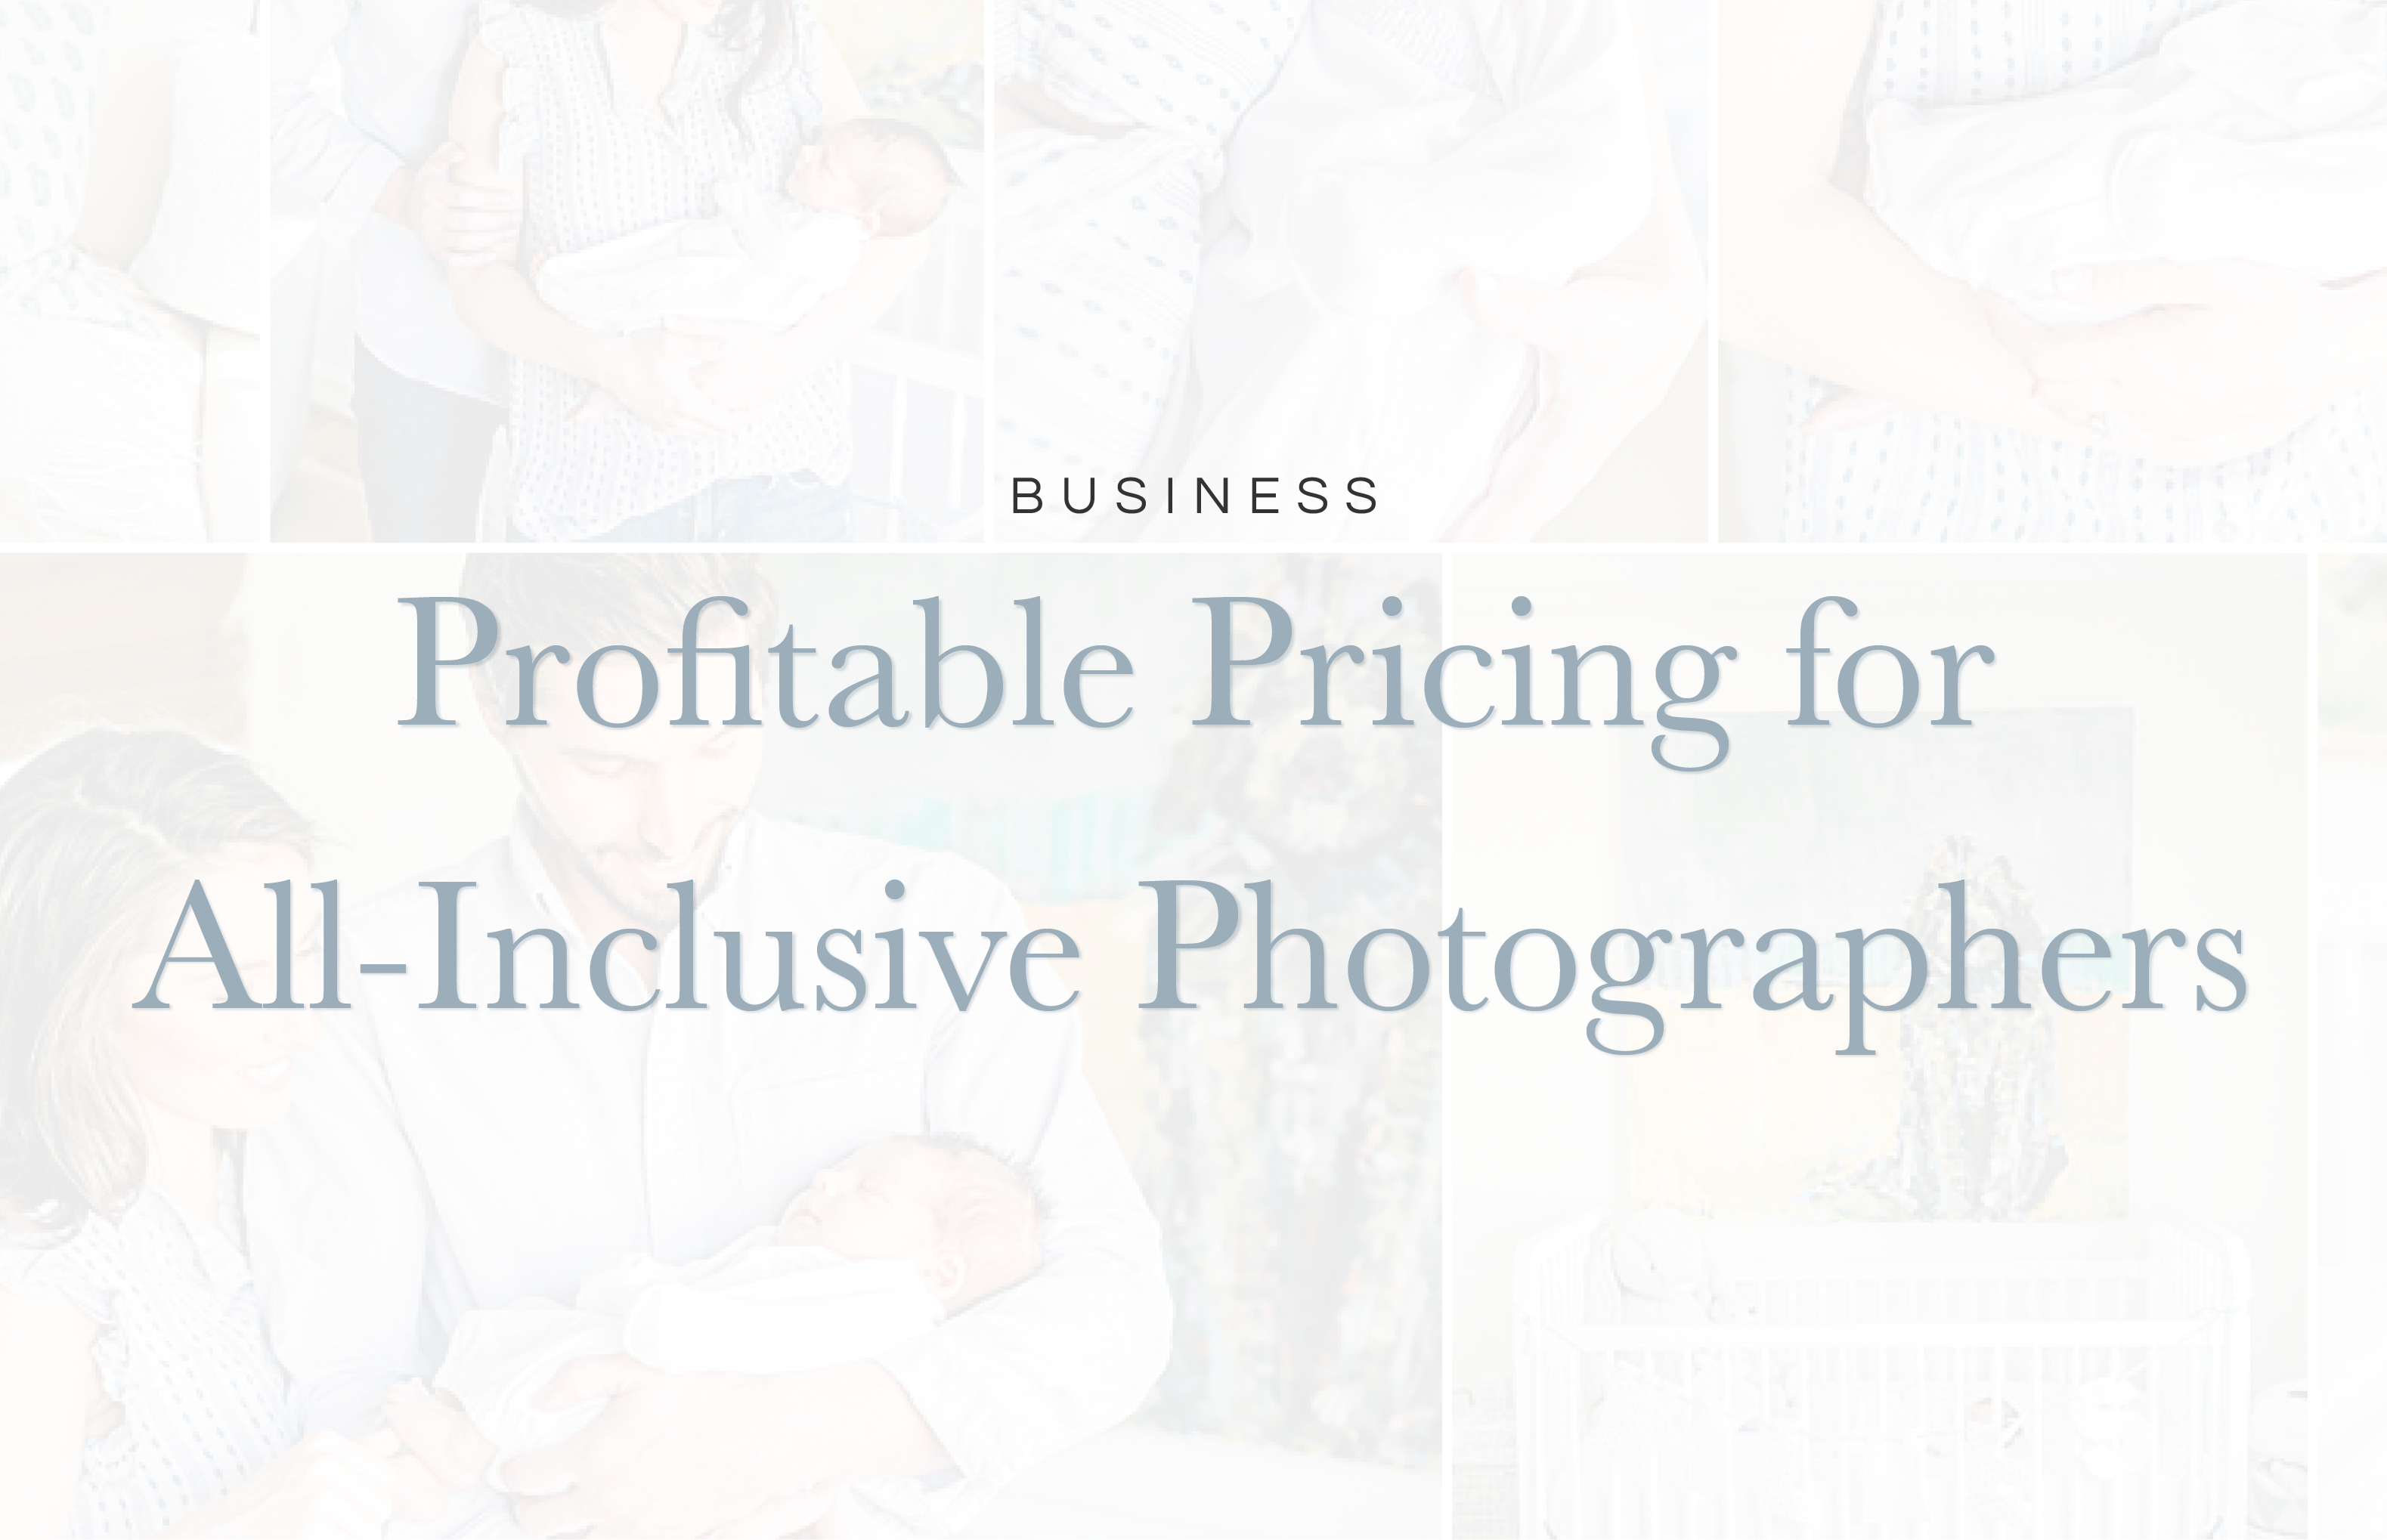 Pricing for All-Inclusive Photographers